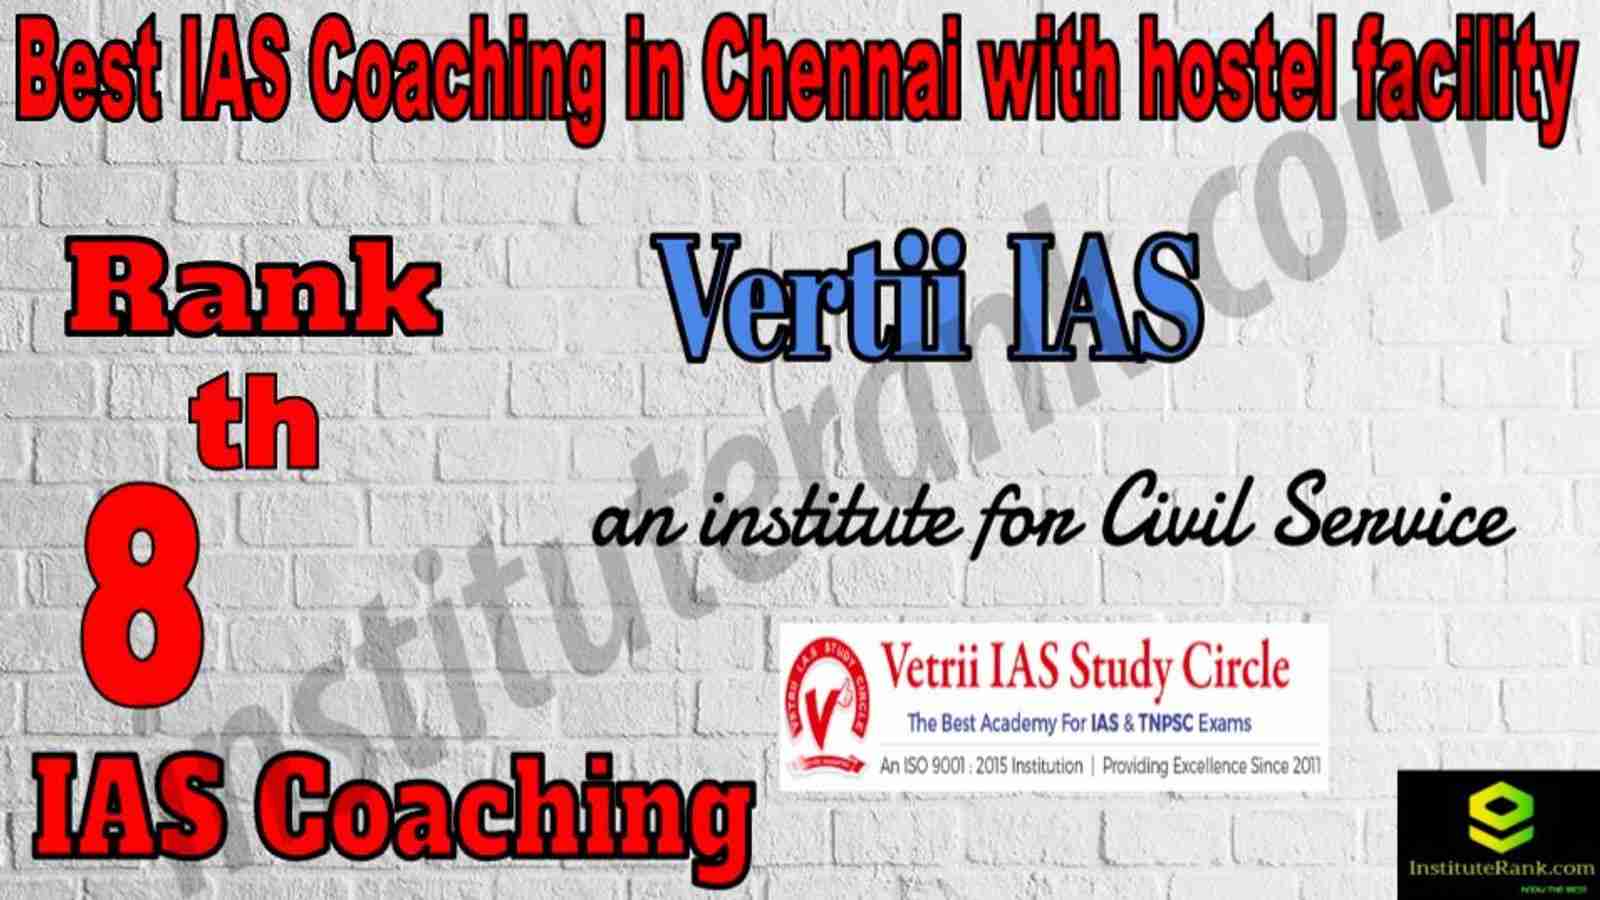 8th Best IAS Coaching in Chennai with hostel facility